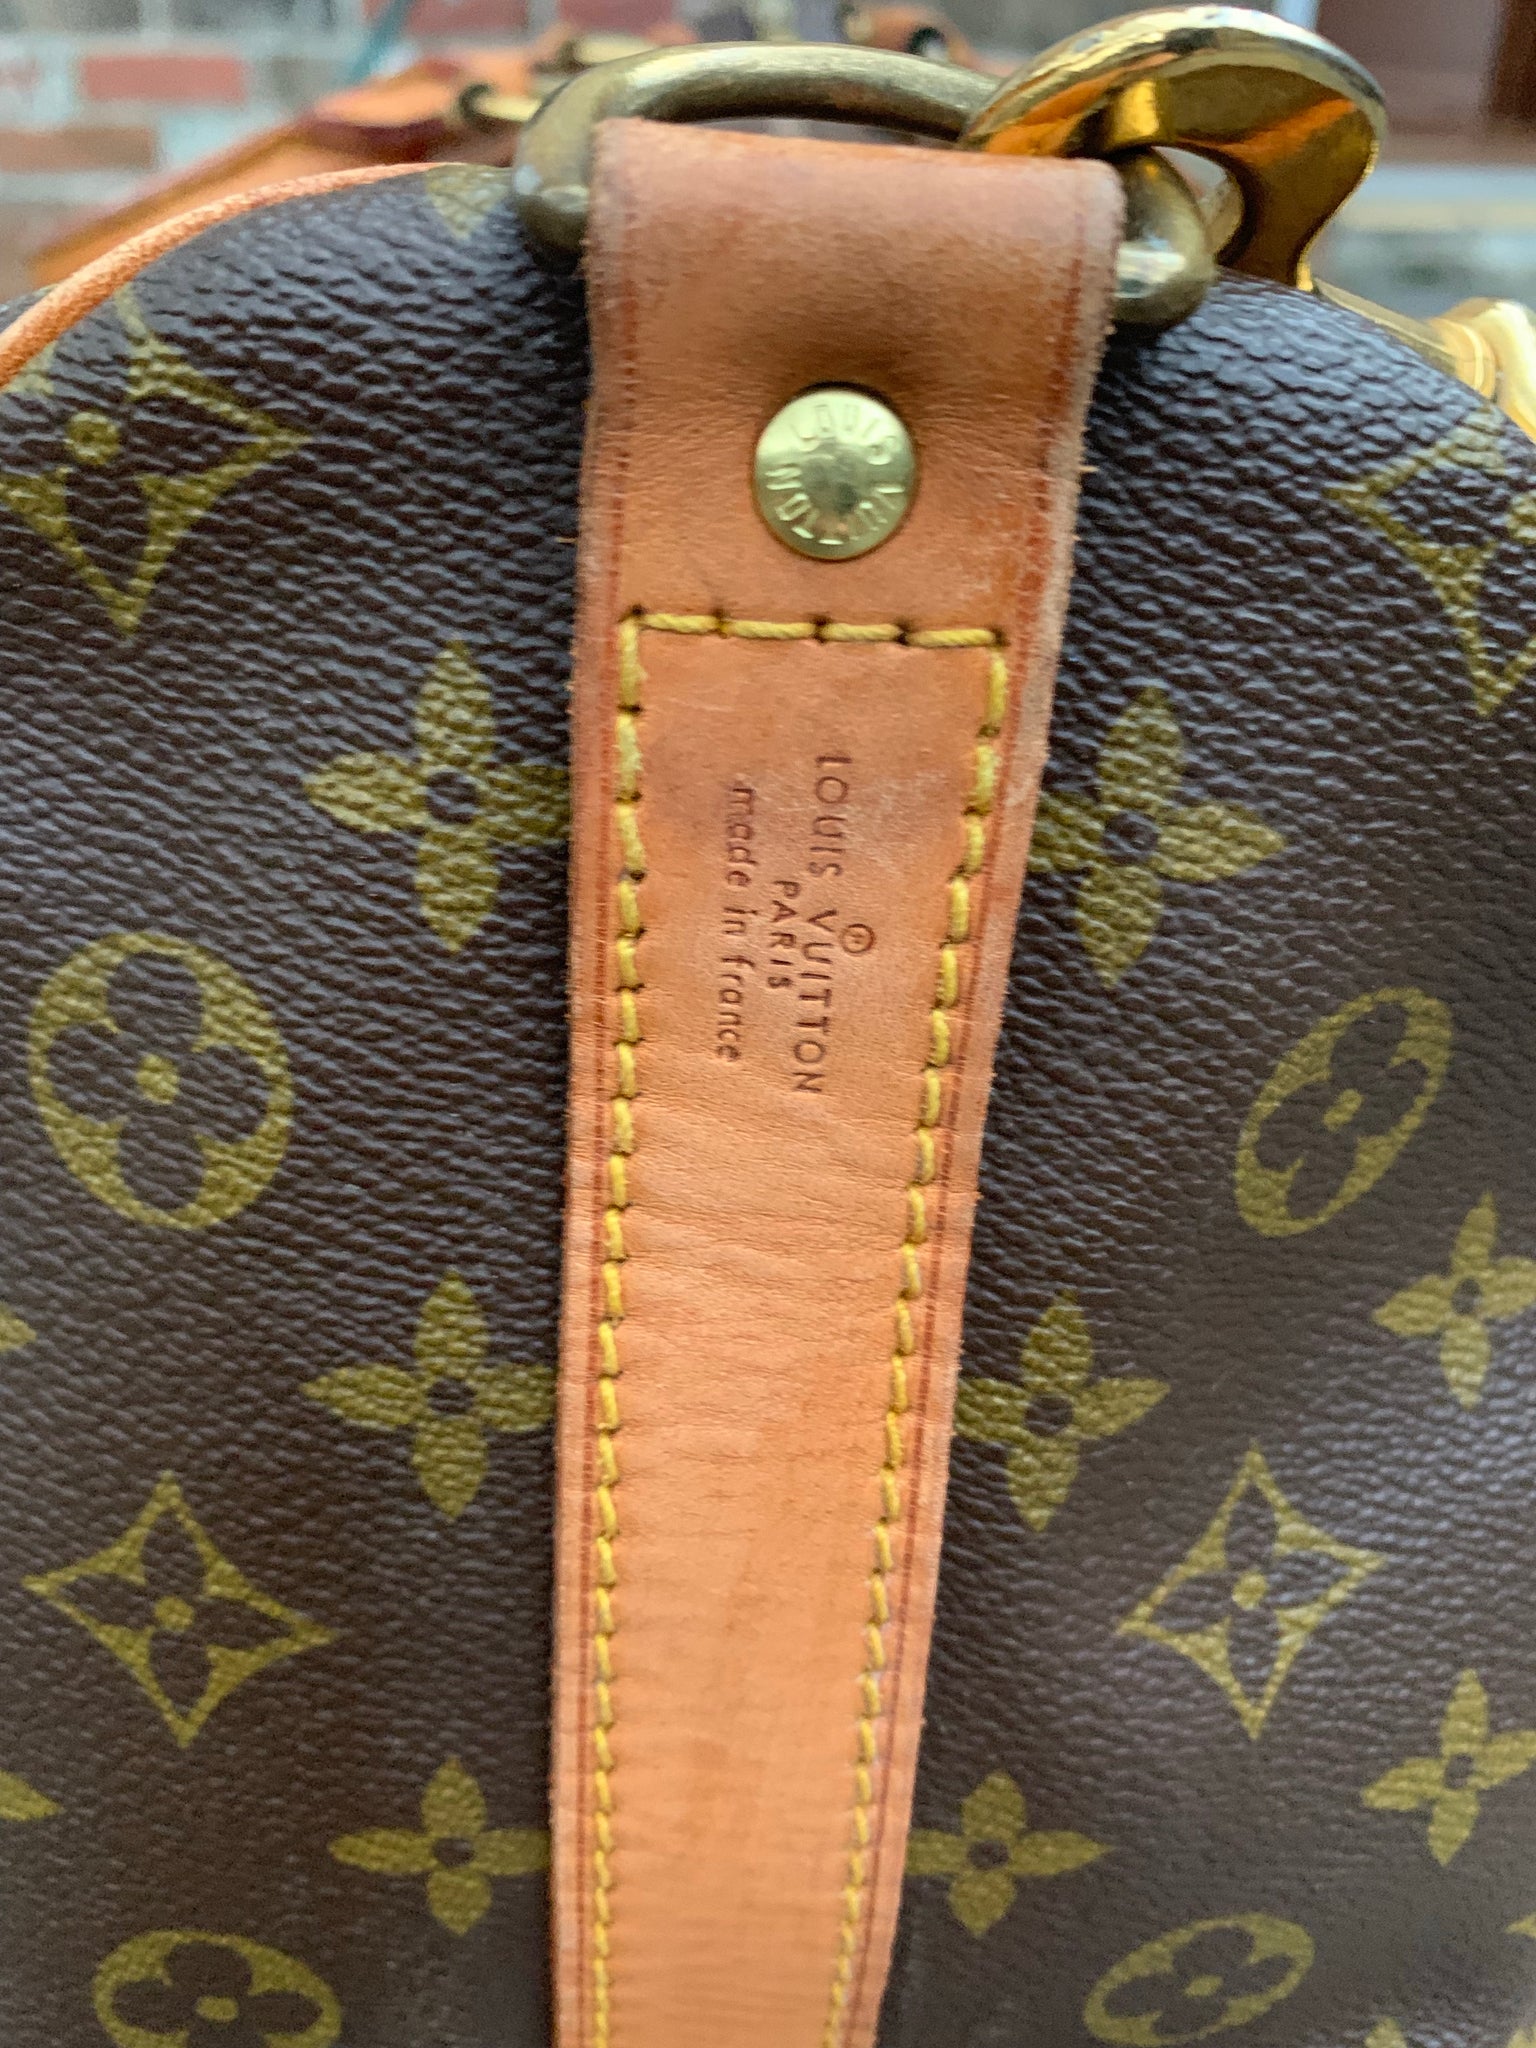 Louis Vuitton Waterproof Keepall Bandouliere 55 Duffle Bag with Strap 5lv62